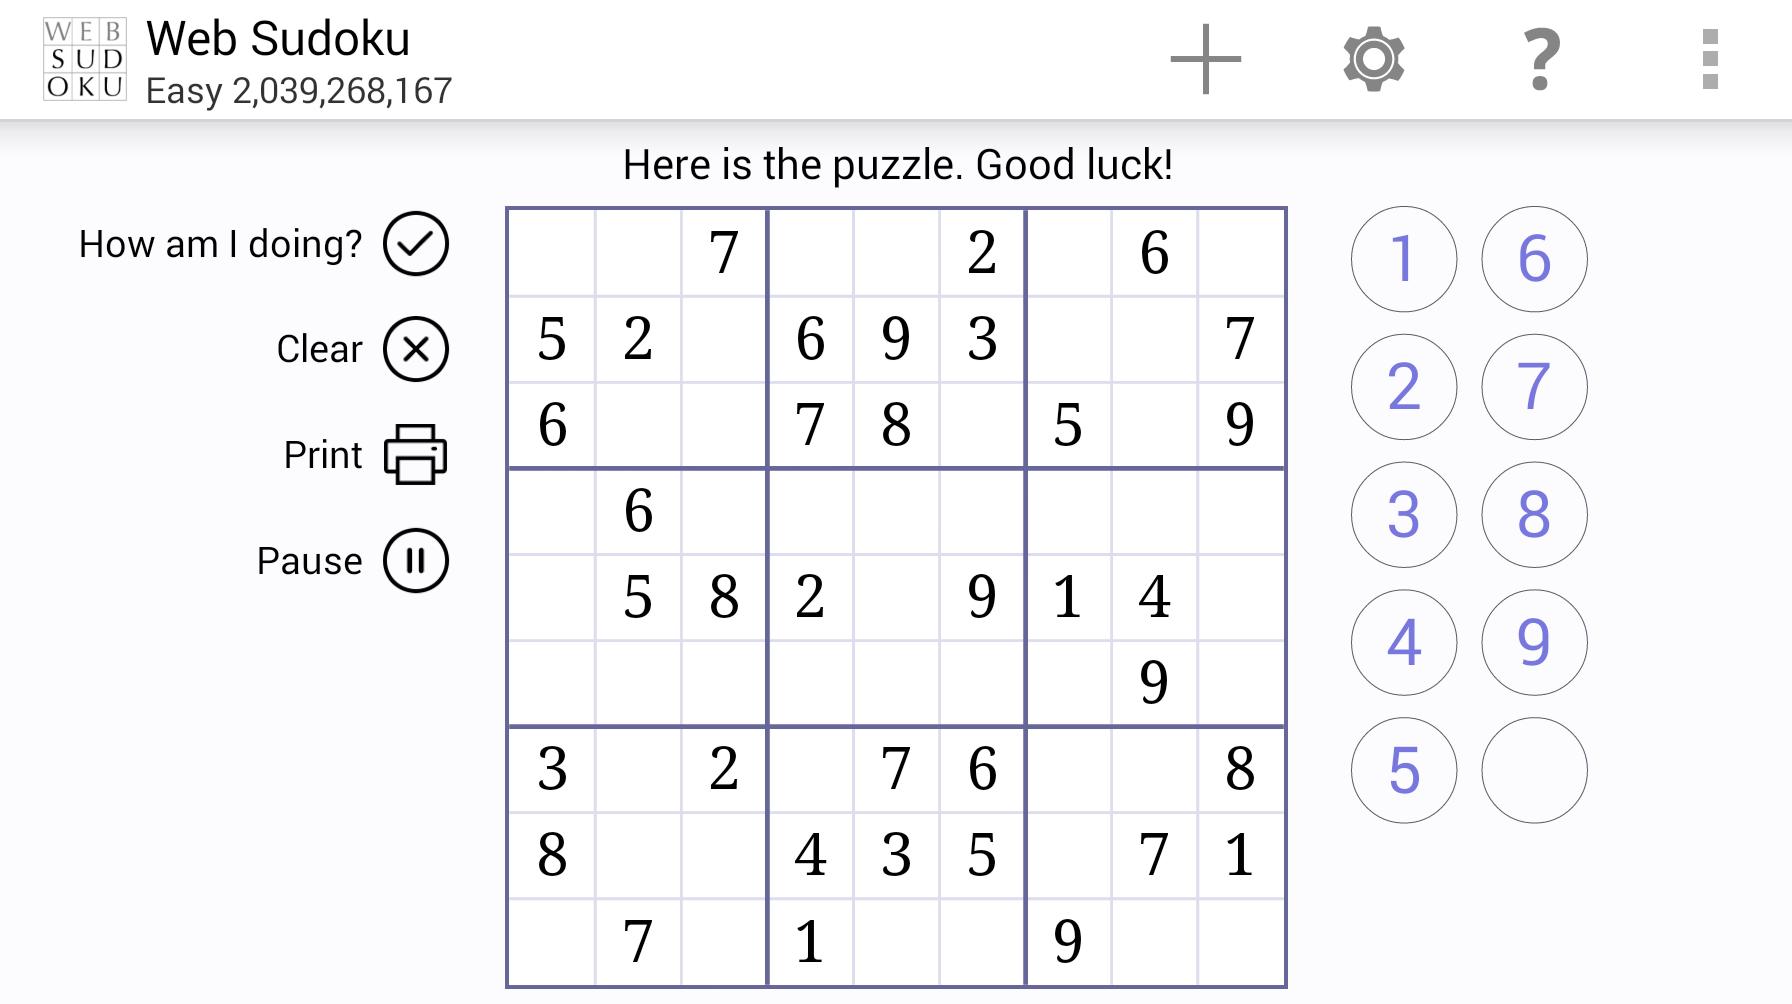 Web Sudoku for Android - APK Download